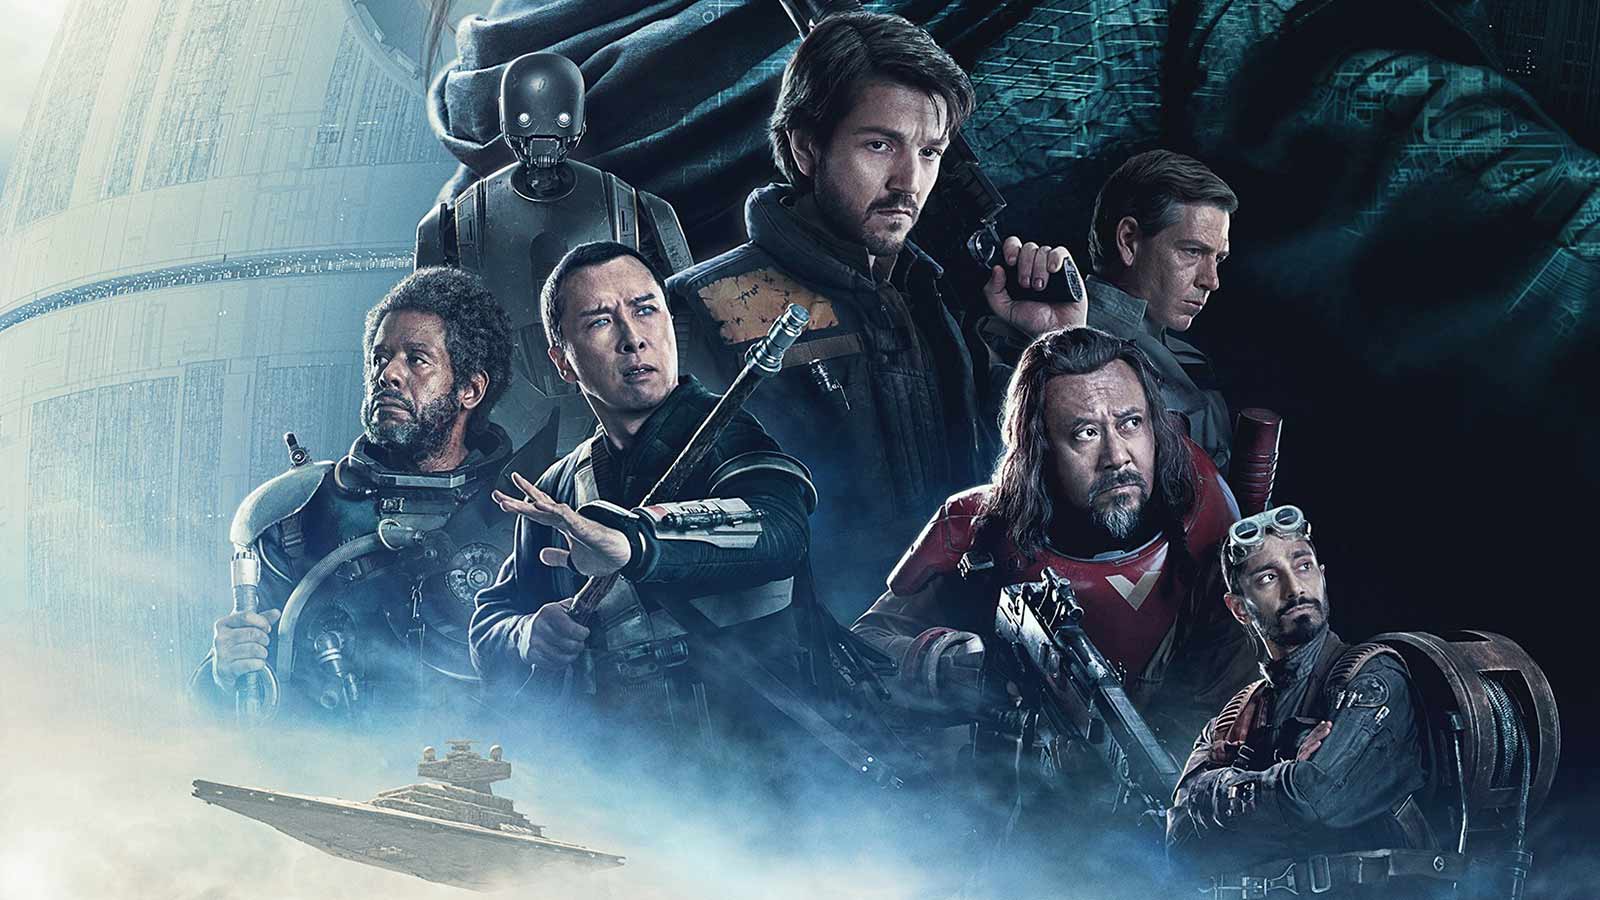 where to watch star wars rogue one online free